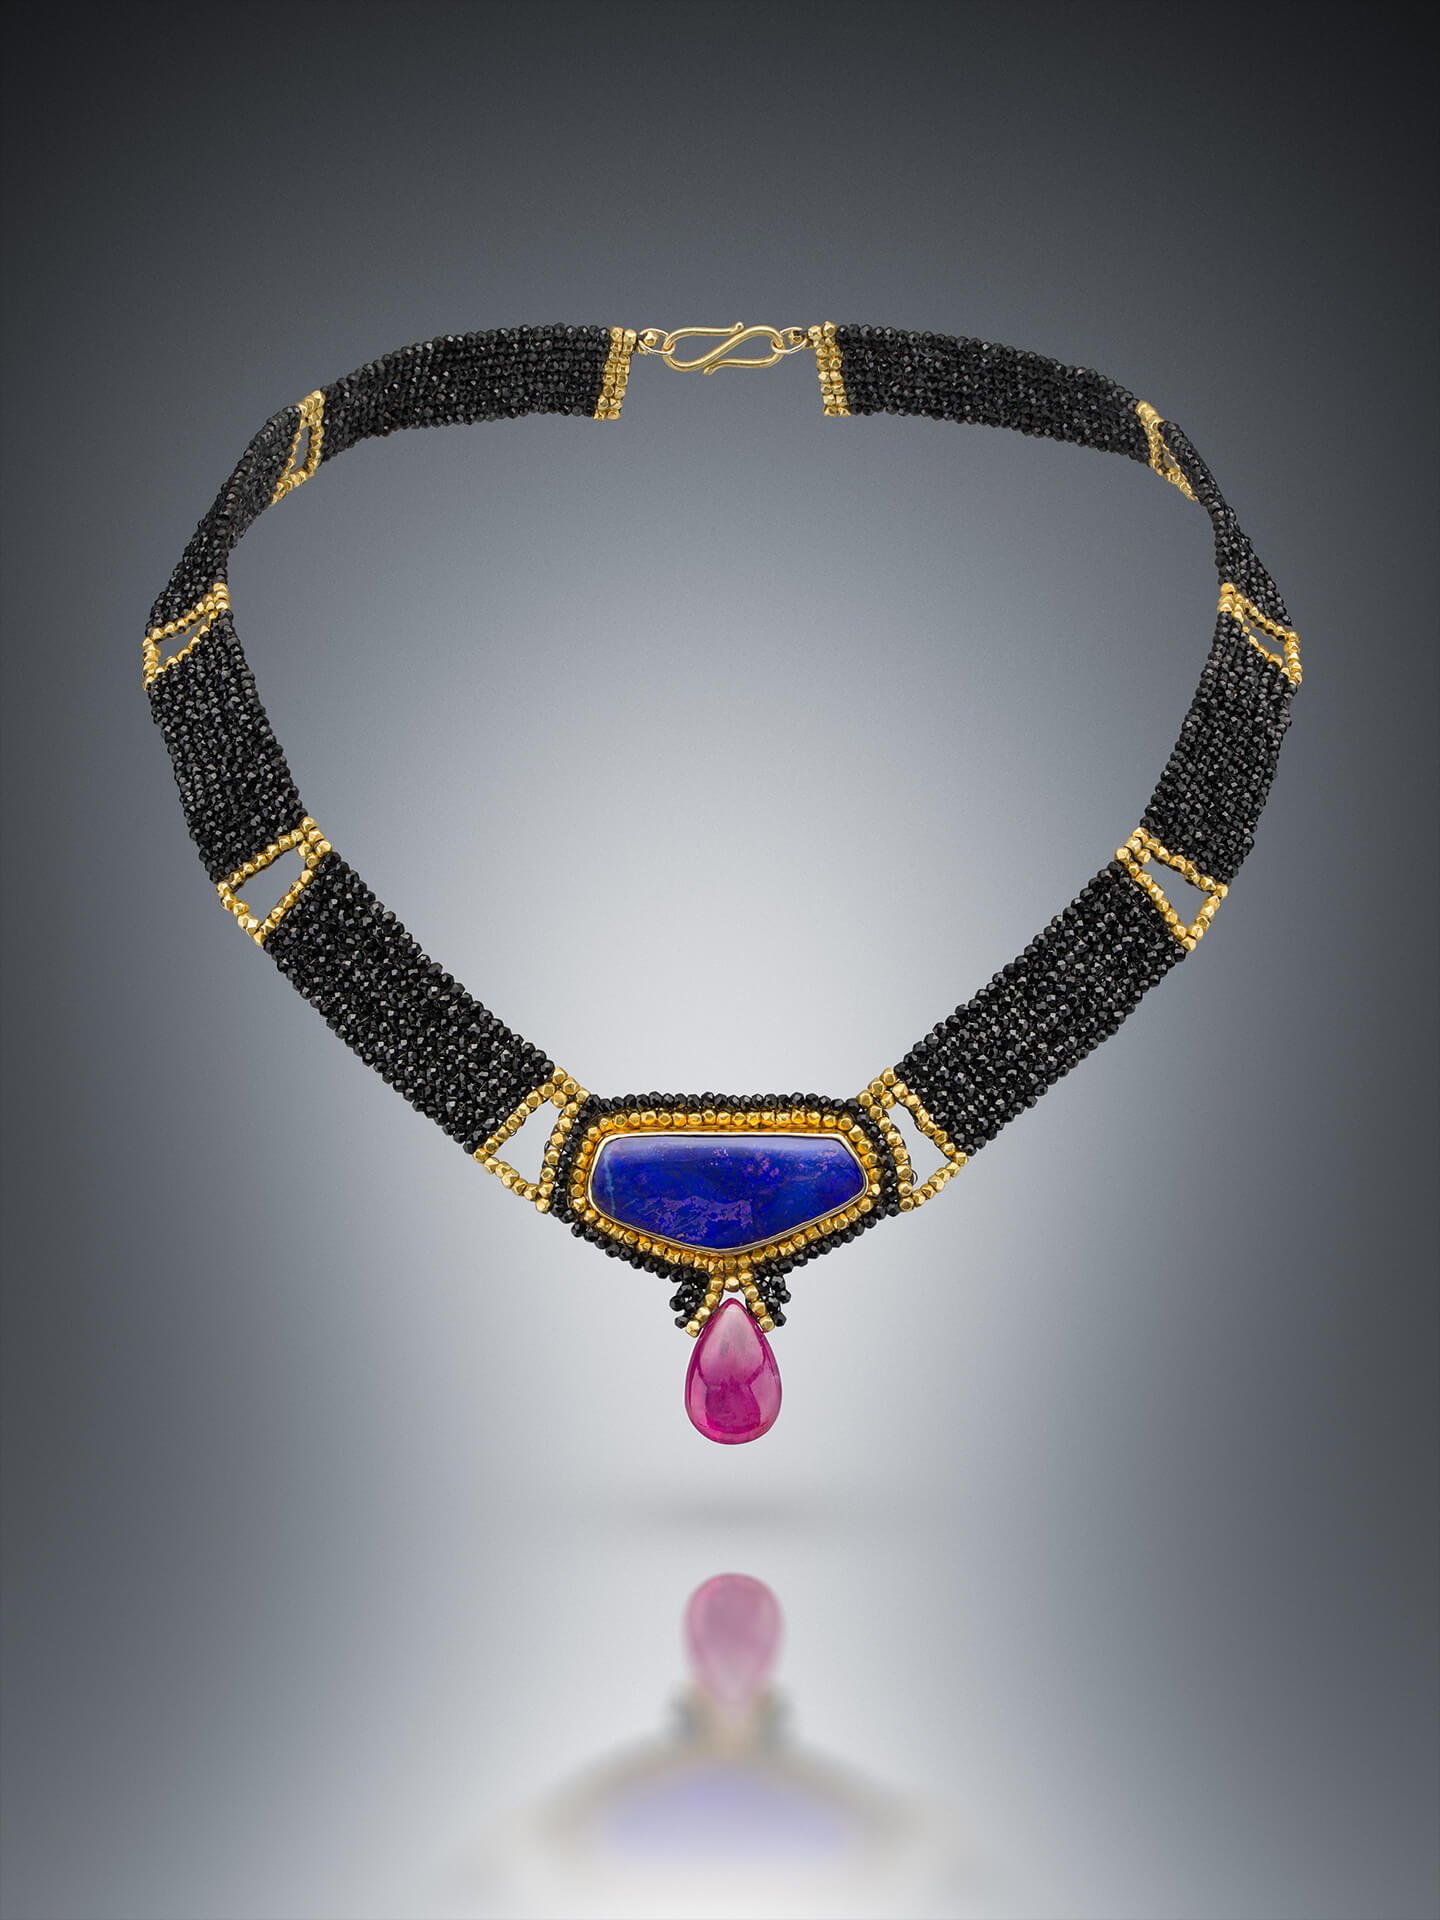 Purple Opal Choker. This choker is hand woven of black spinel and 18k gold beads. The center is a purple boulder opal from Australia in a hand fabricated setting of 18k gold. Ruby drop.